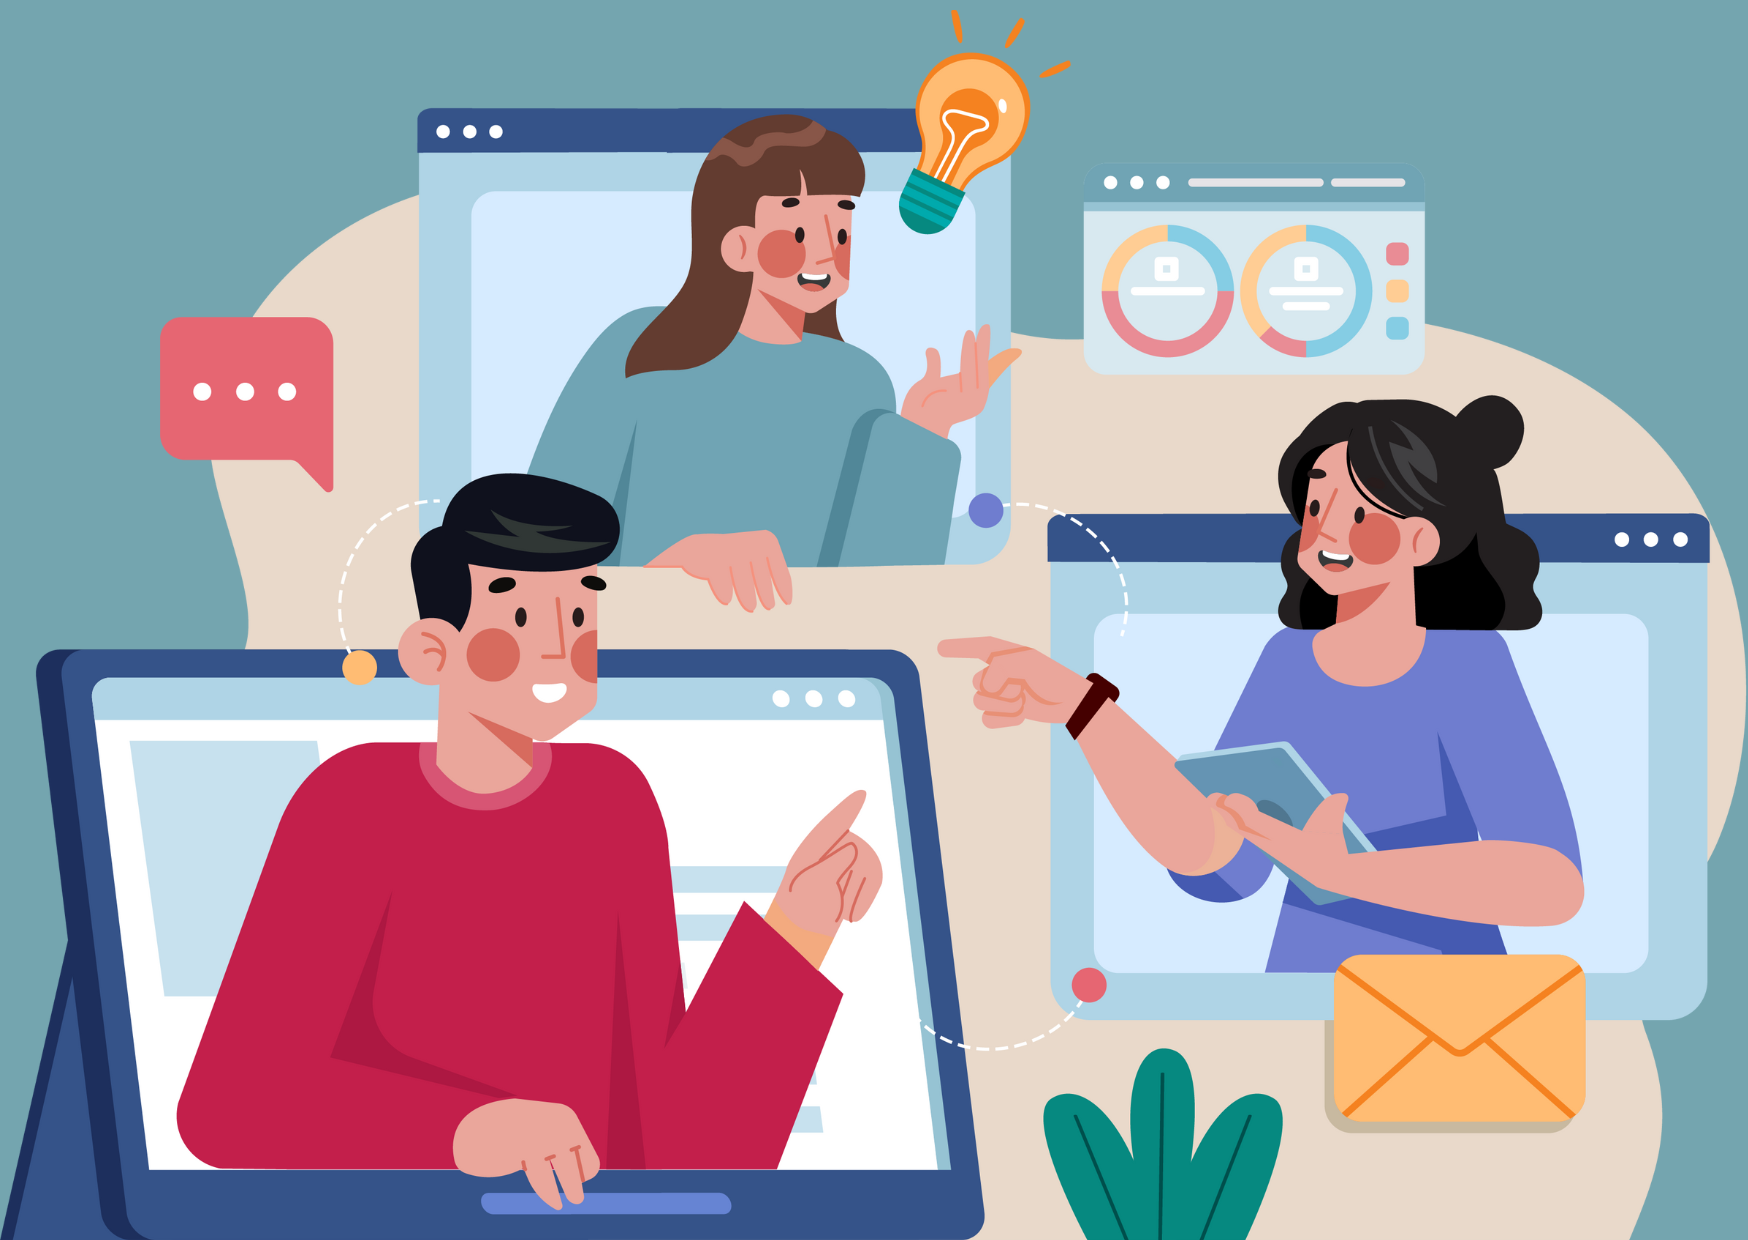 Featured image: People collaborate from their computers. - Read full post: How Can Technology Make Your Business Meetings More Effective?